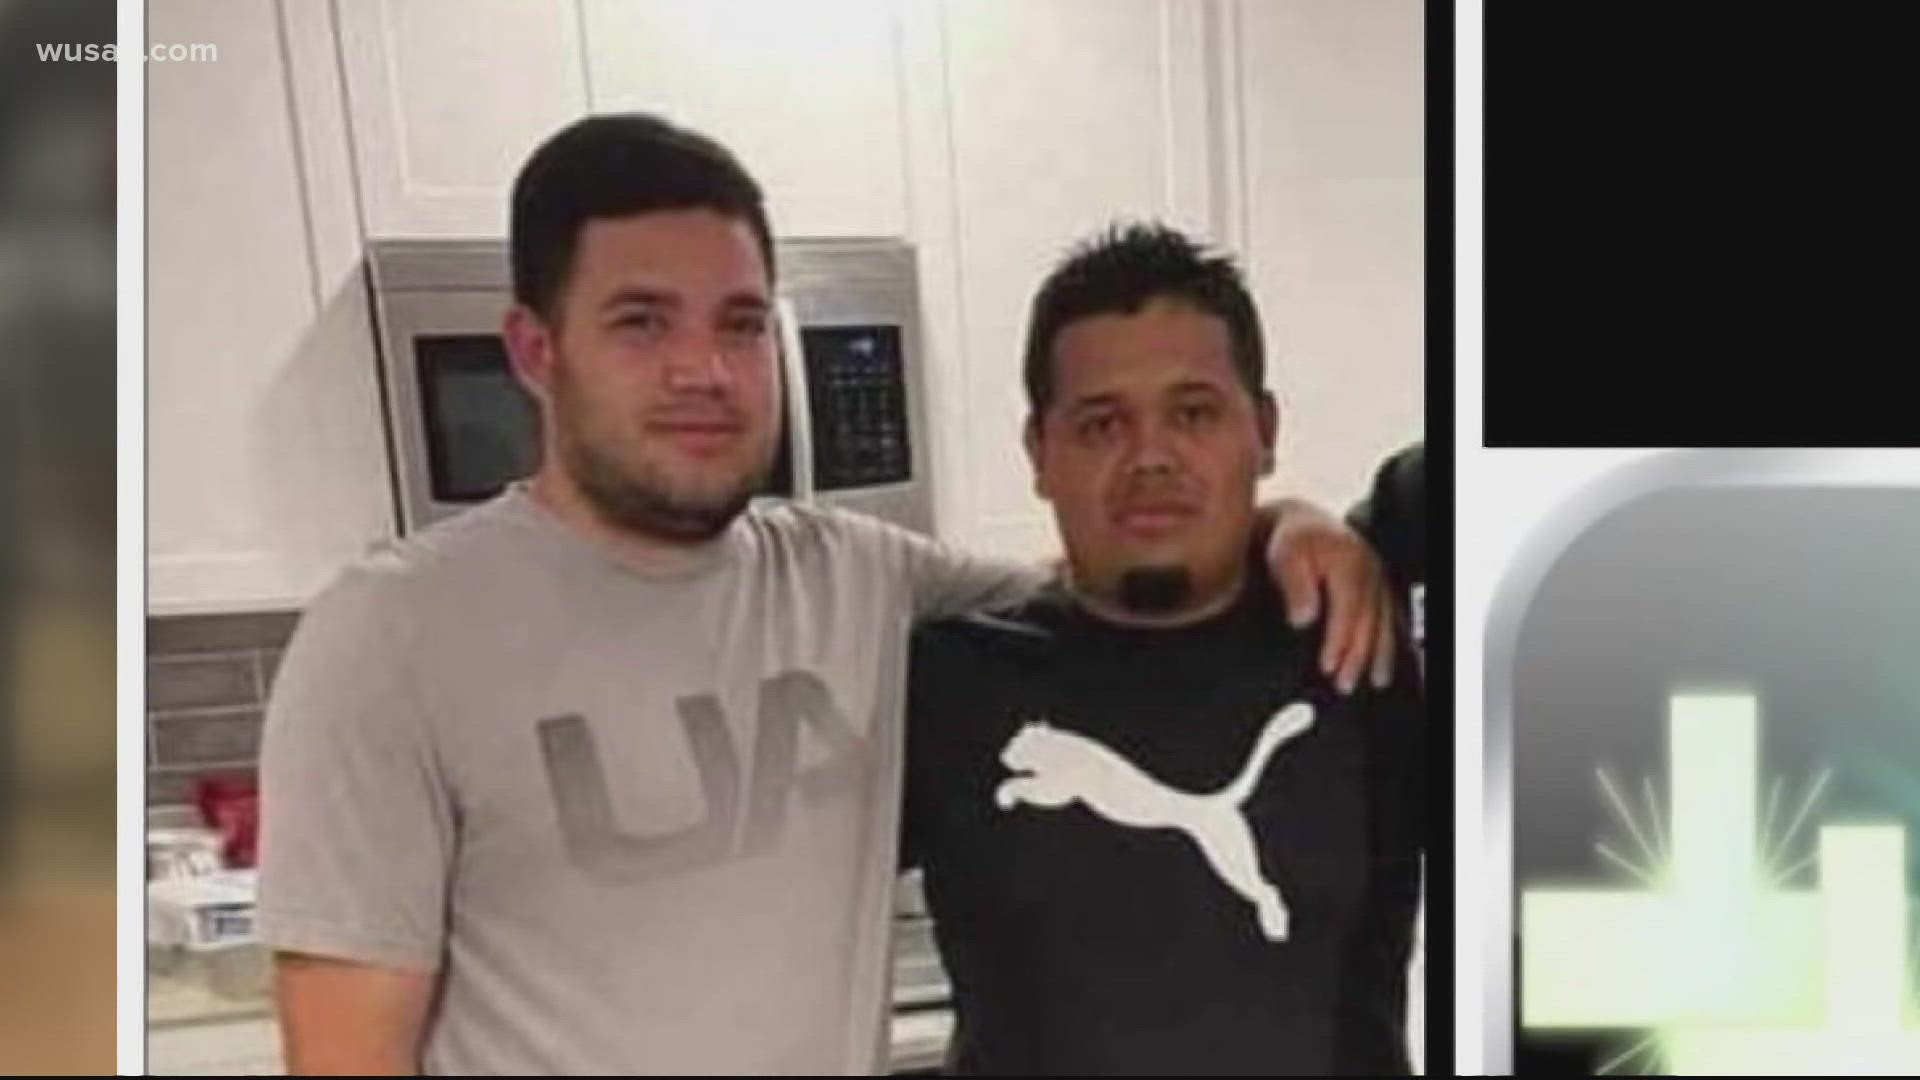 The men who died were 30-year-old Carlos Ramon Carranza and his brother Luis Eduardo Carranza, according to their cousin, Nelson Herrera.